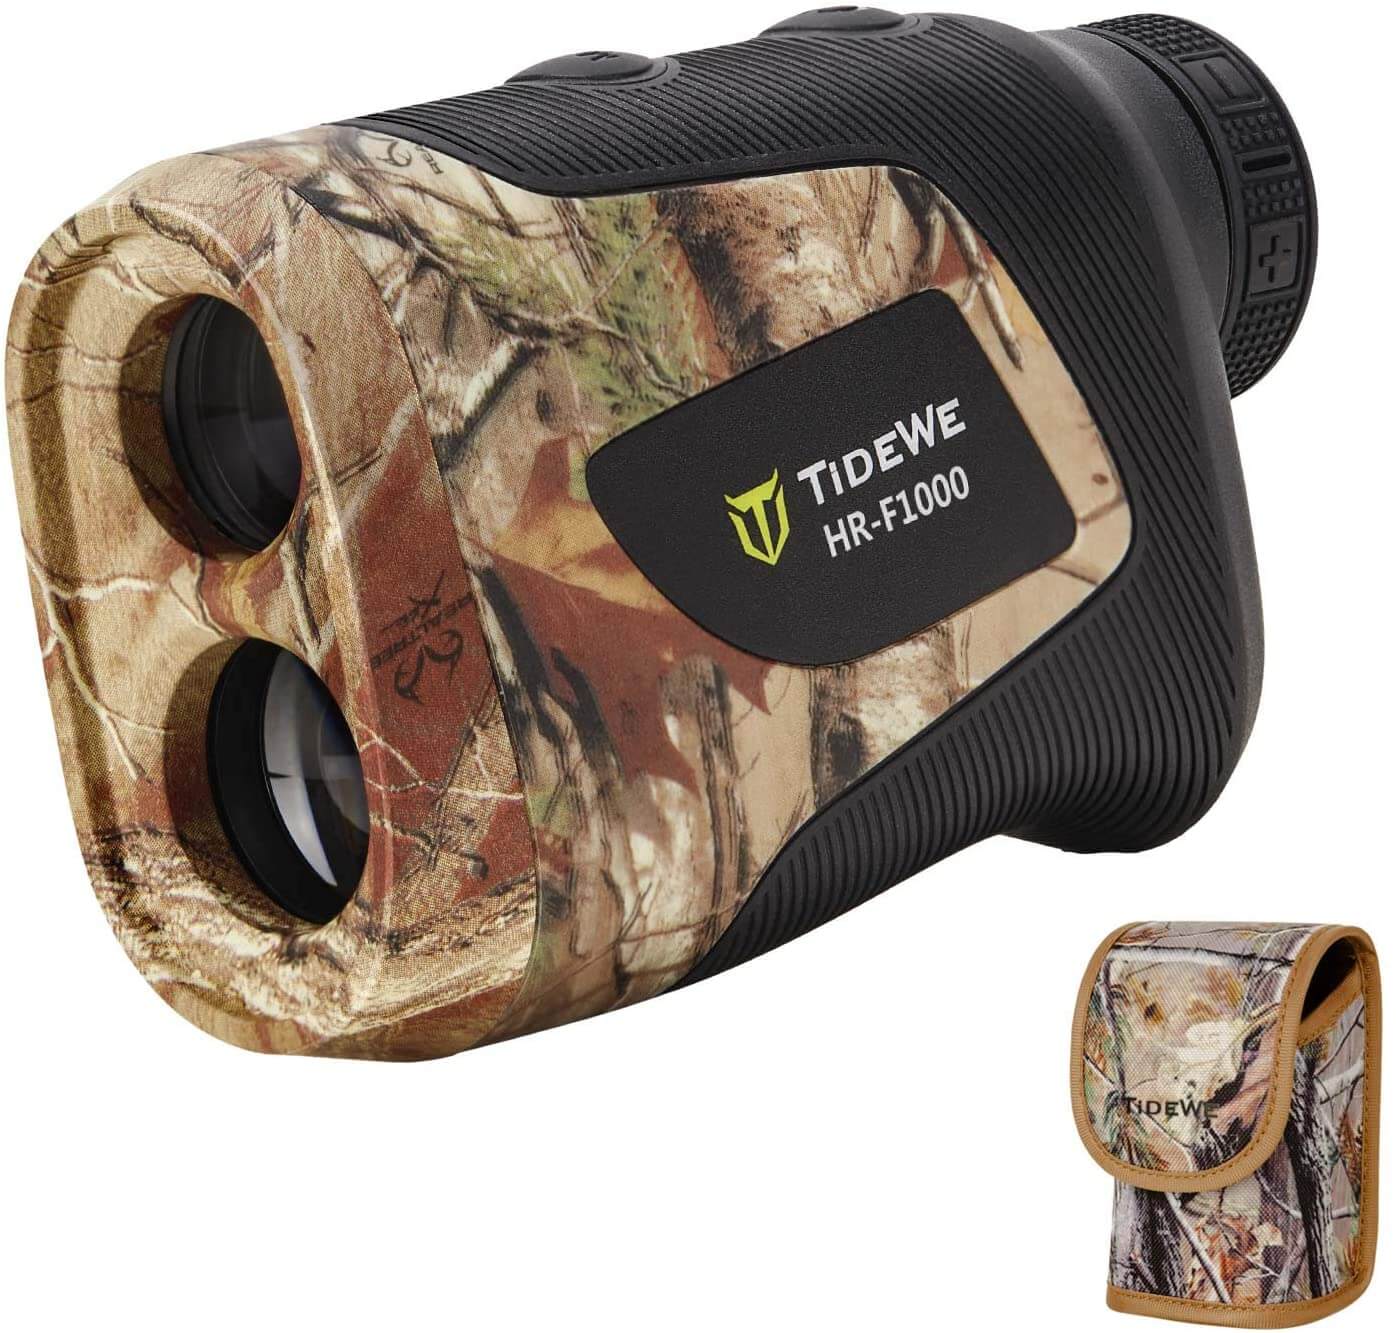 Cheap Rangefinder for Bow Hunting - TIDEWE 1000 Yards